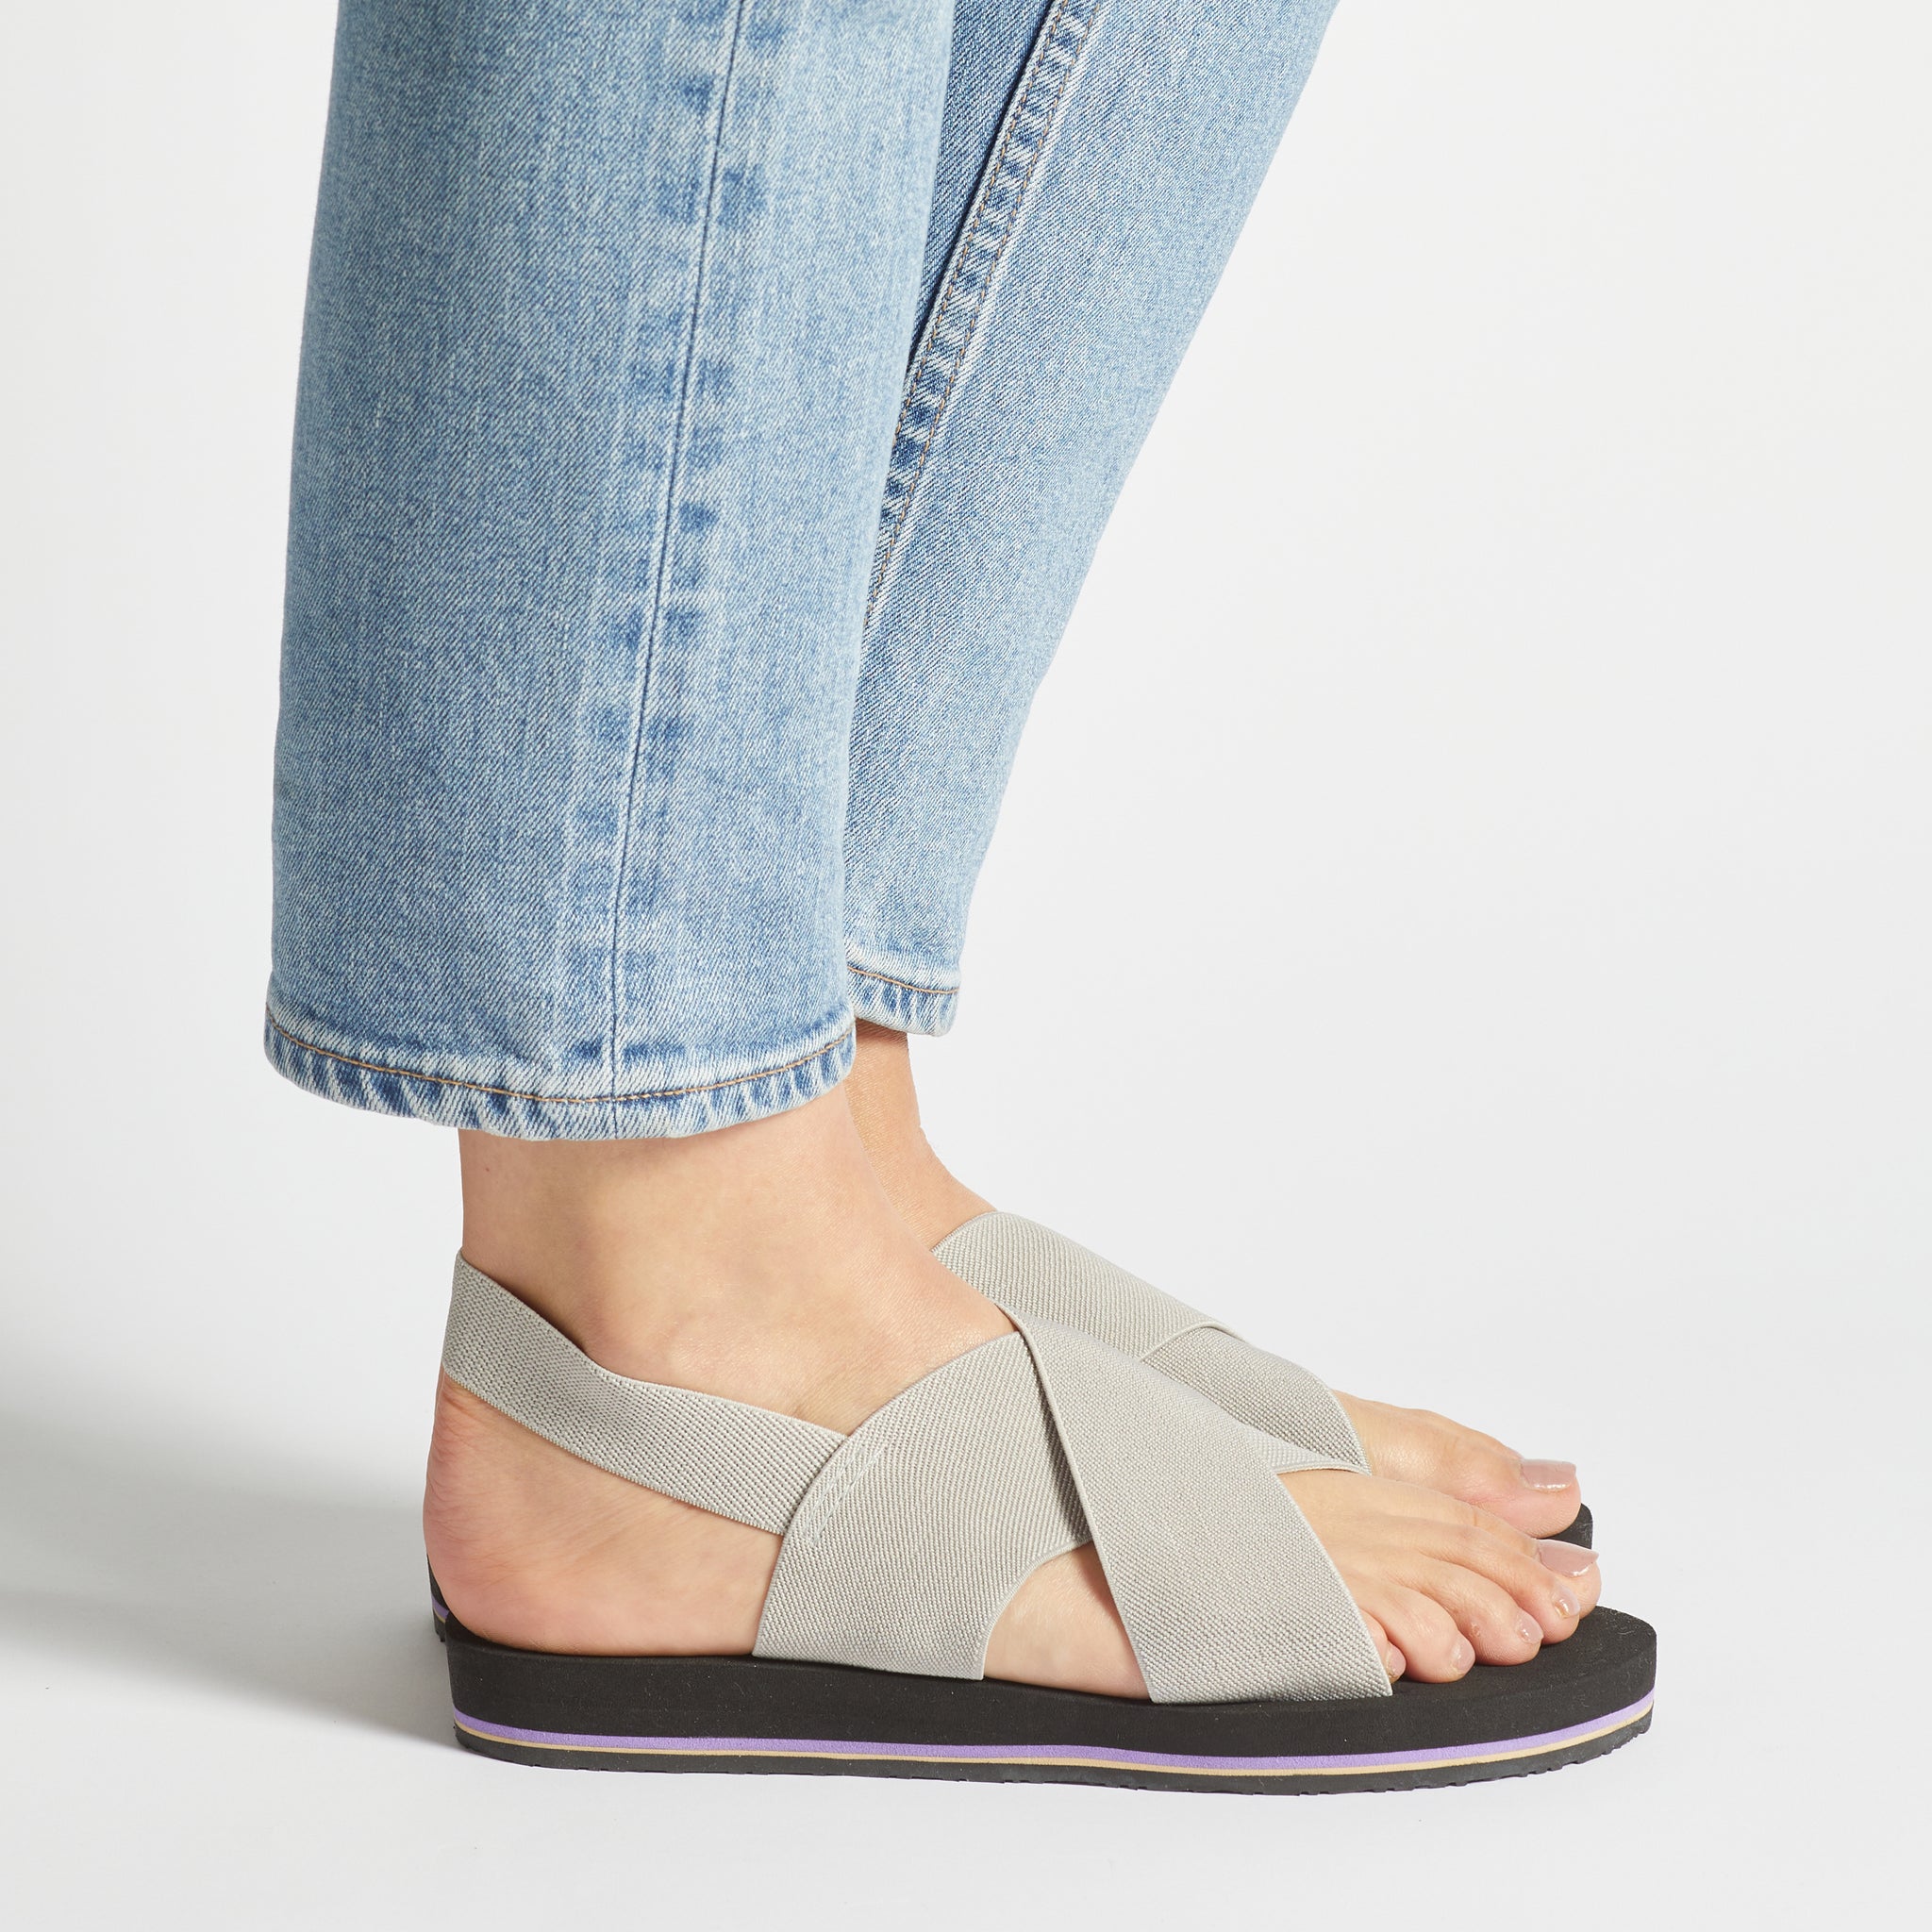 Pieds Original Pearl Grey Sandal | Made by hand in Australia